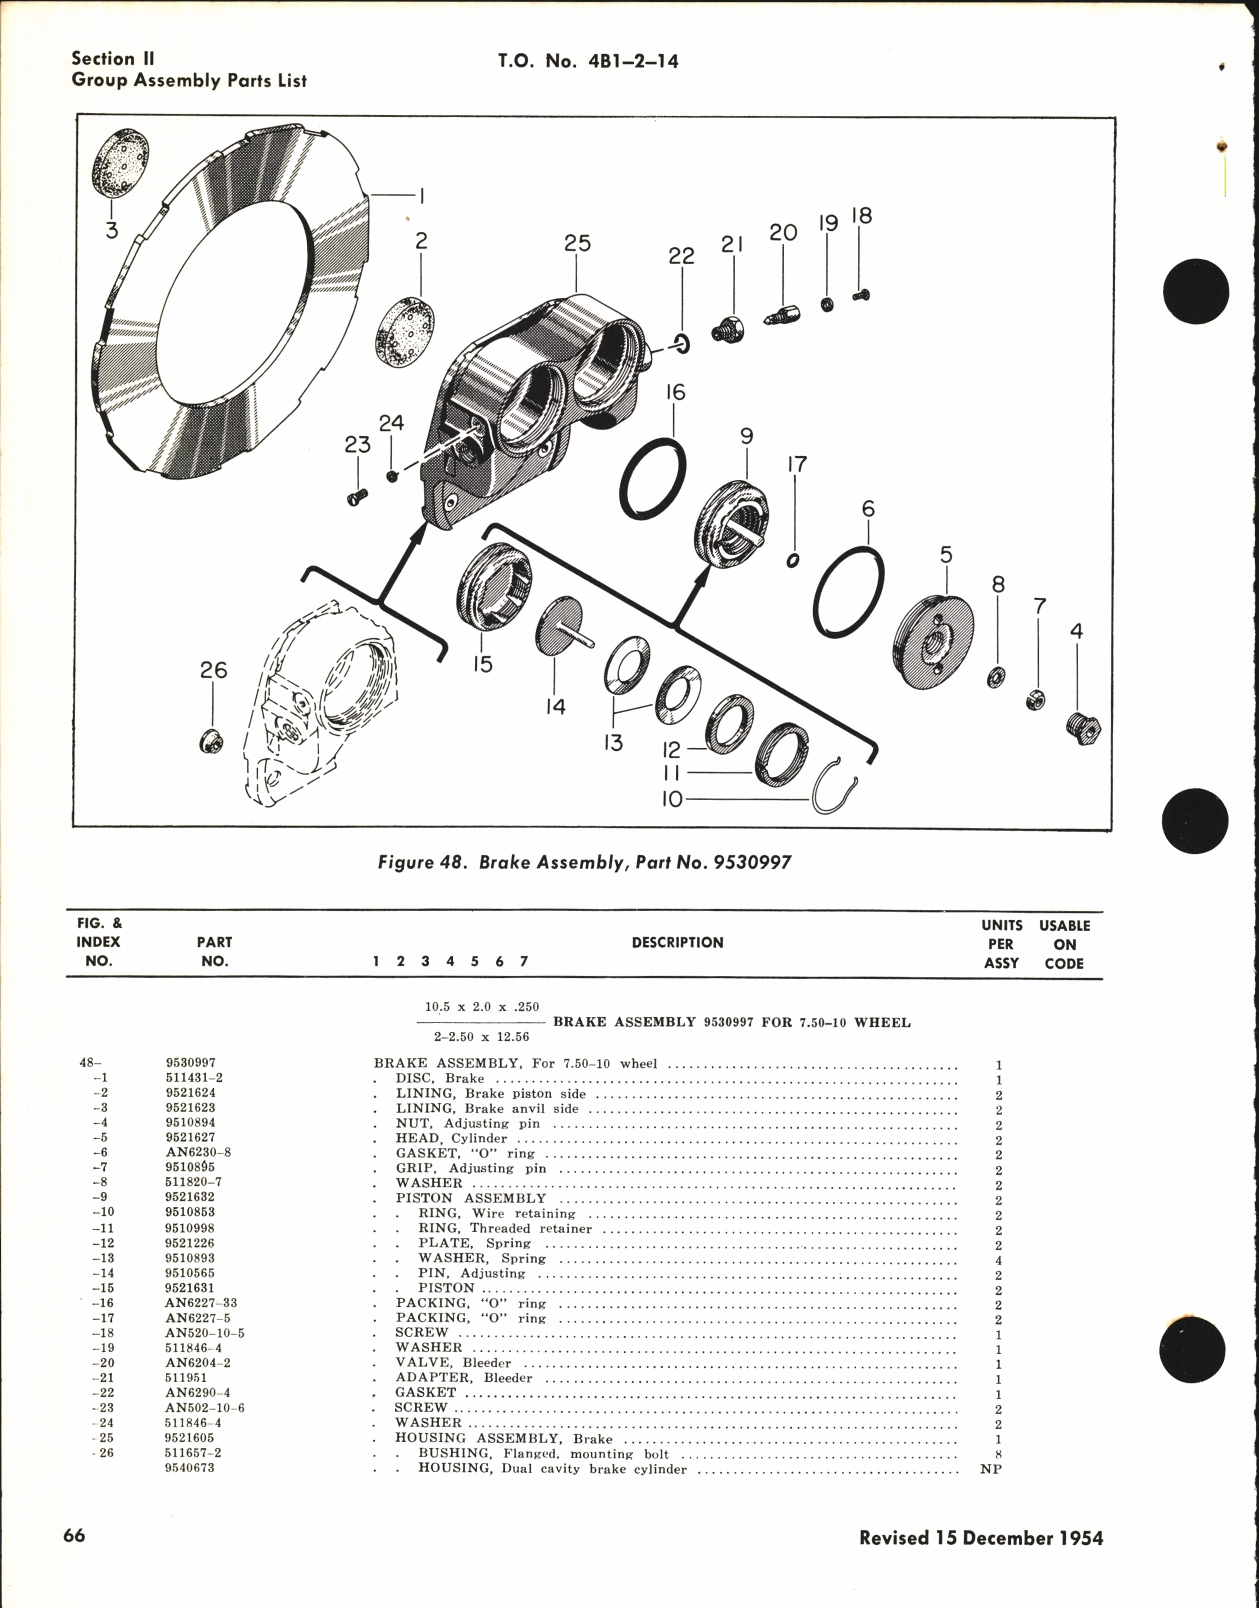 Sample page 6 from AirCorps Library document: Illustrated Parts Breakdown for Single and Dual Disc Brakes (Goodyear)